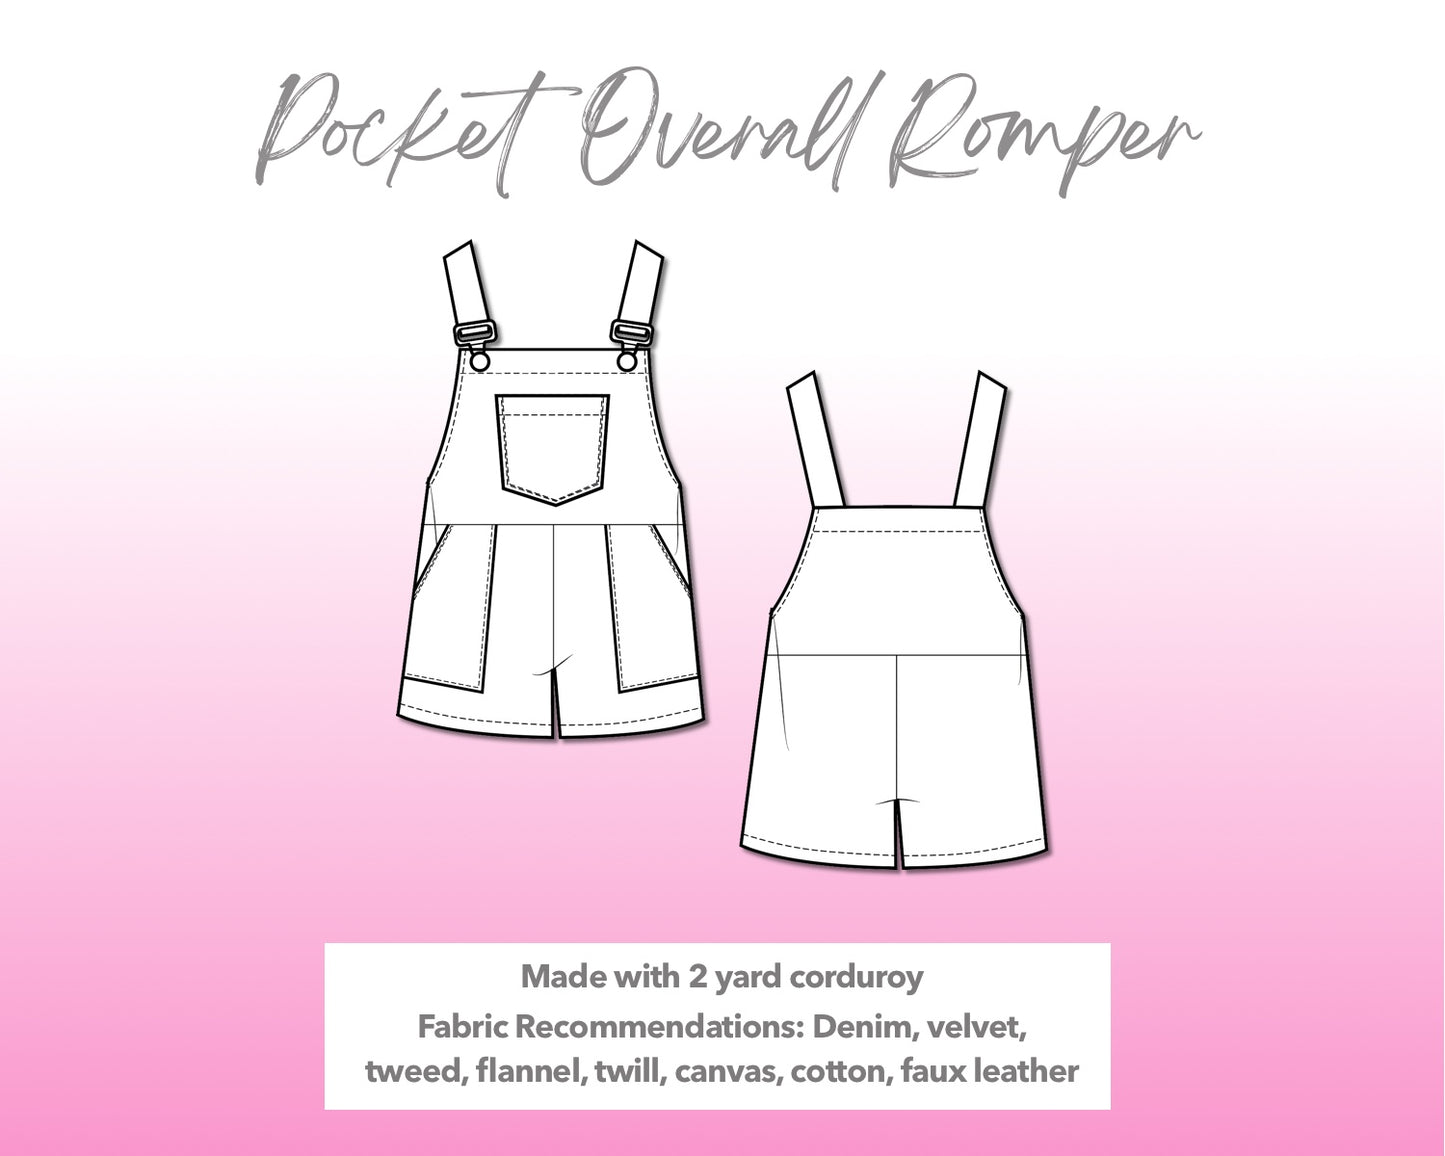 Illustration and detailed description for Pocket Overall Romper sewing pattern.